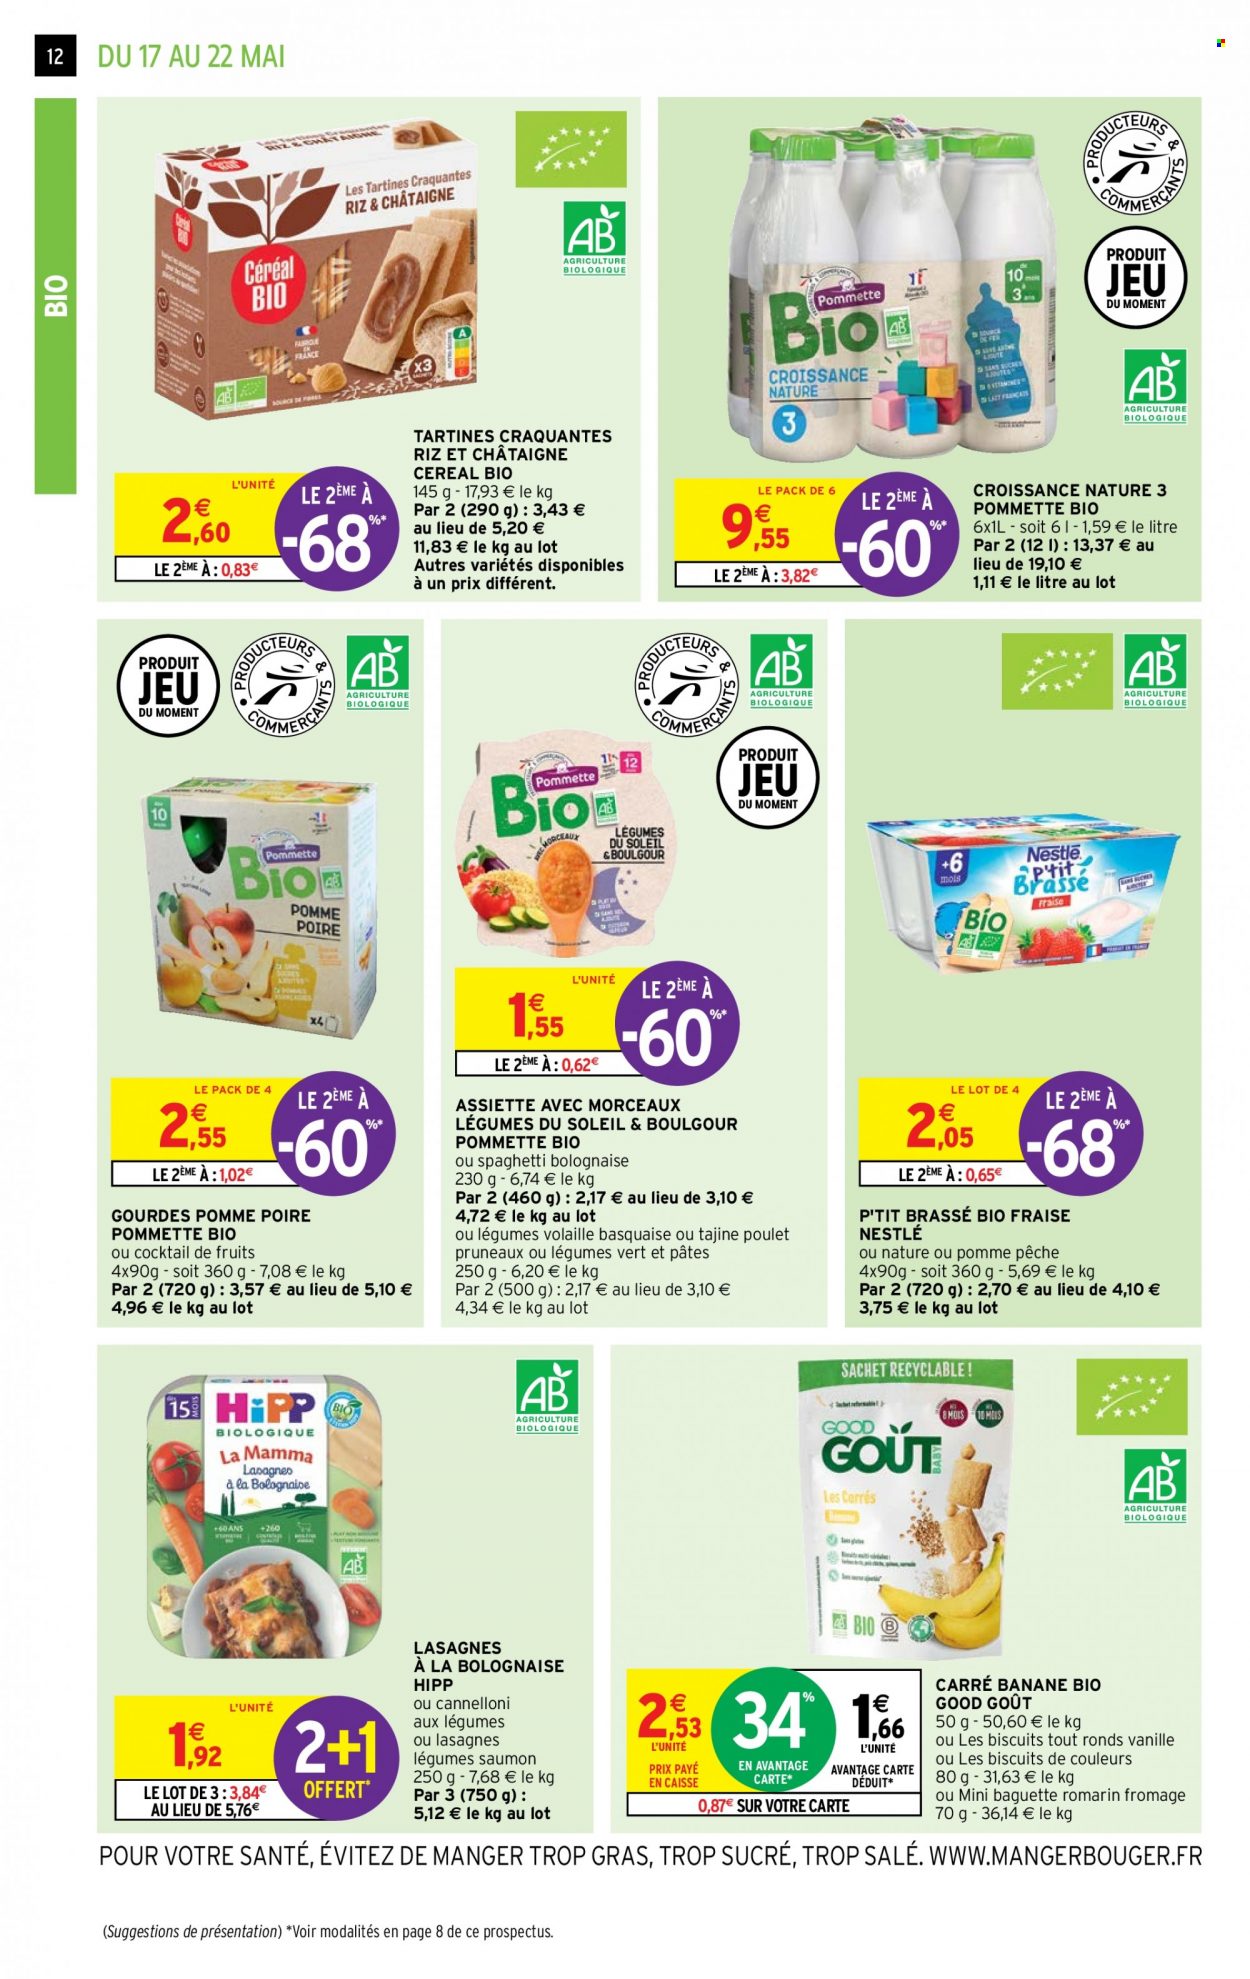 Catalogue Intermarché Express - 17.05.2022 - 22.05.2022. Page 12.